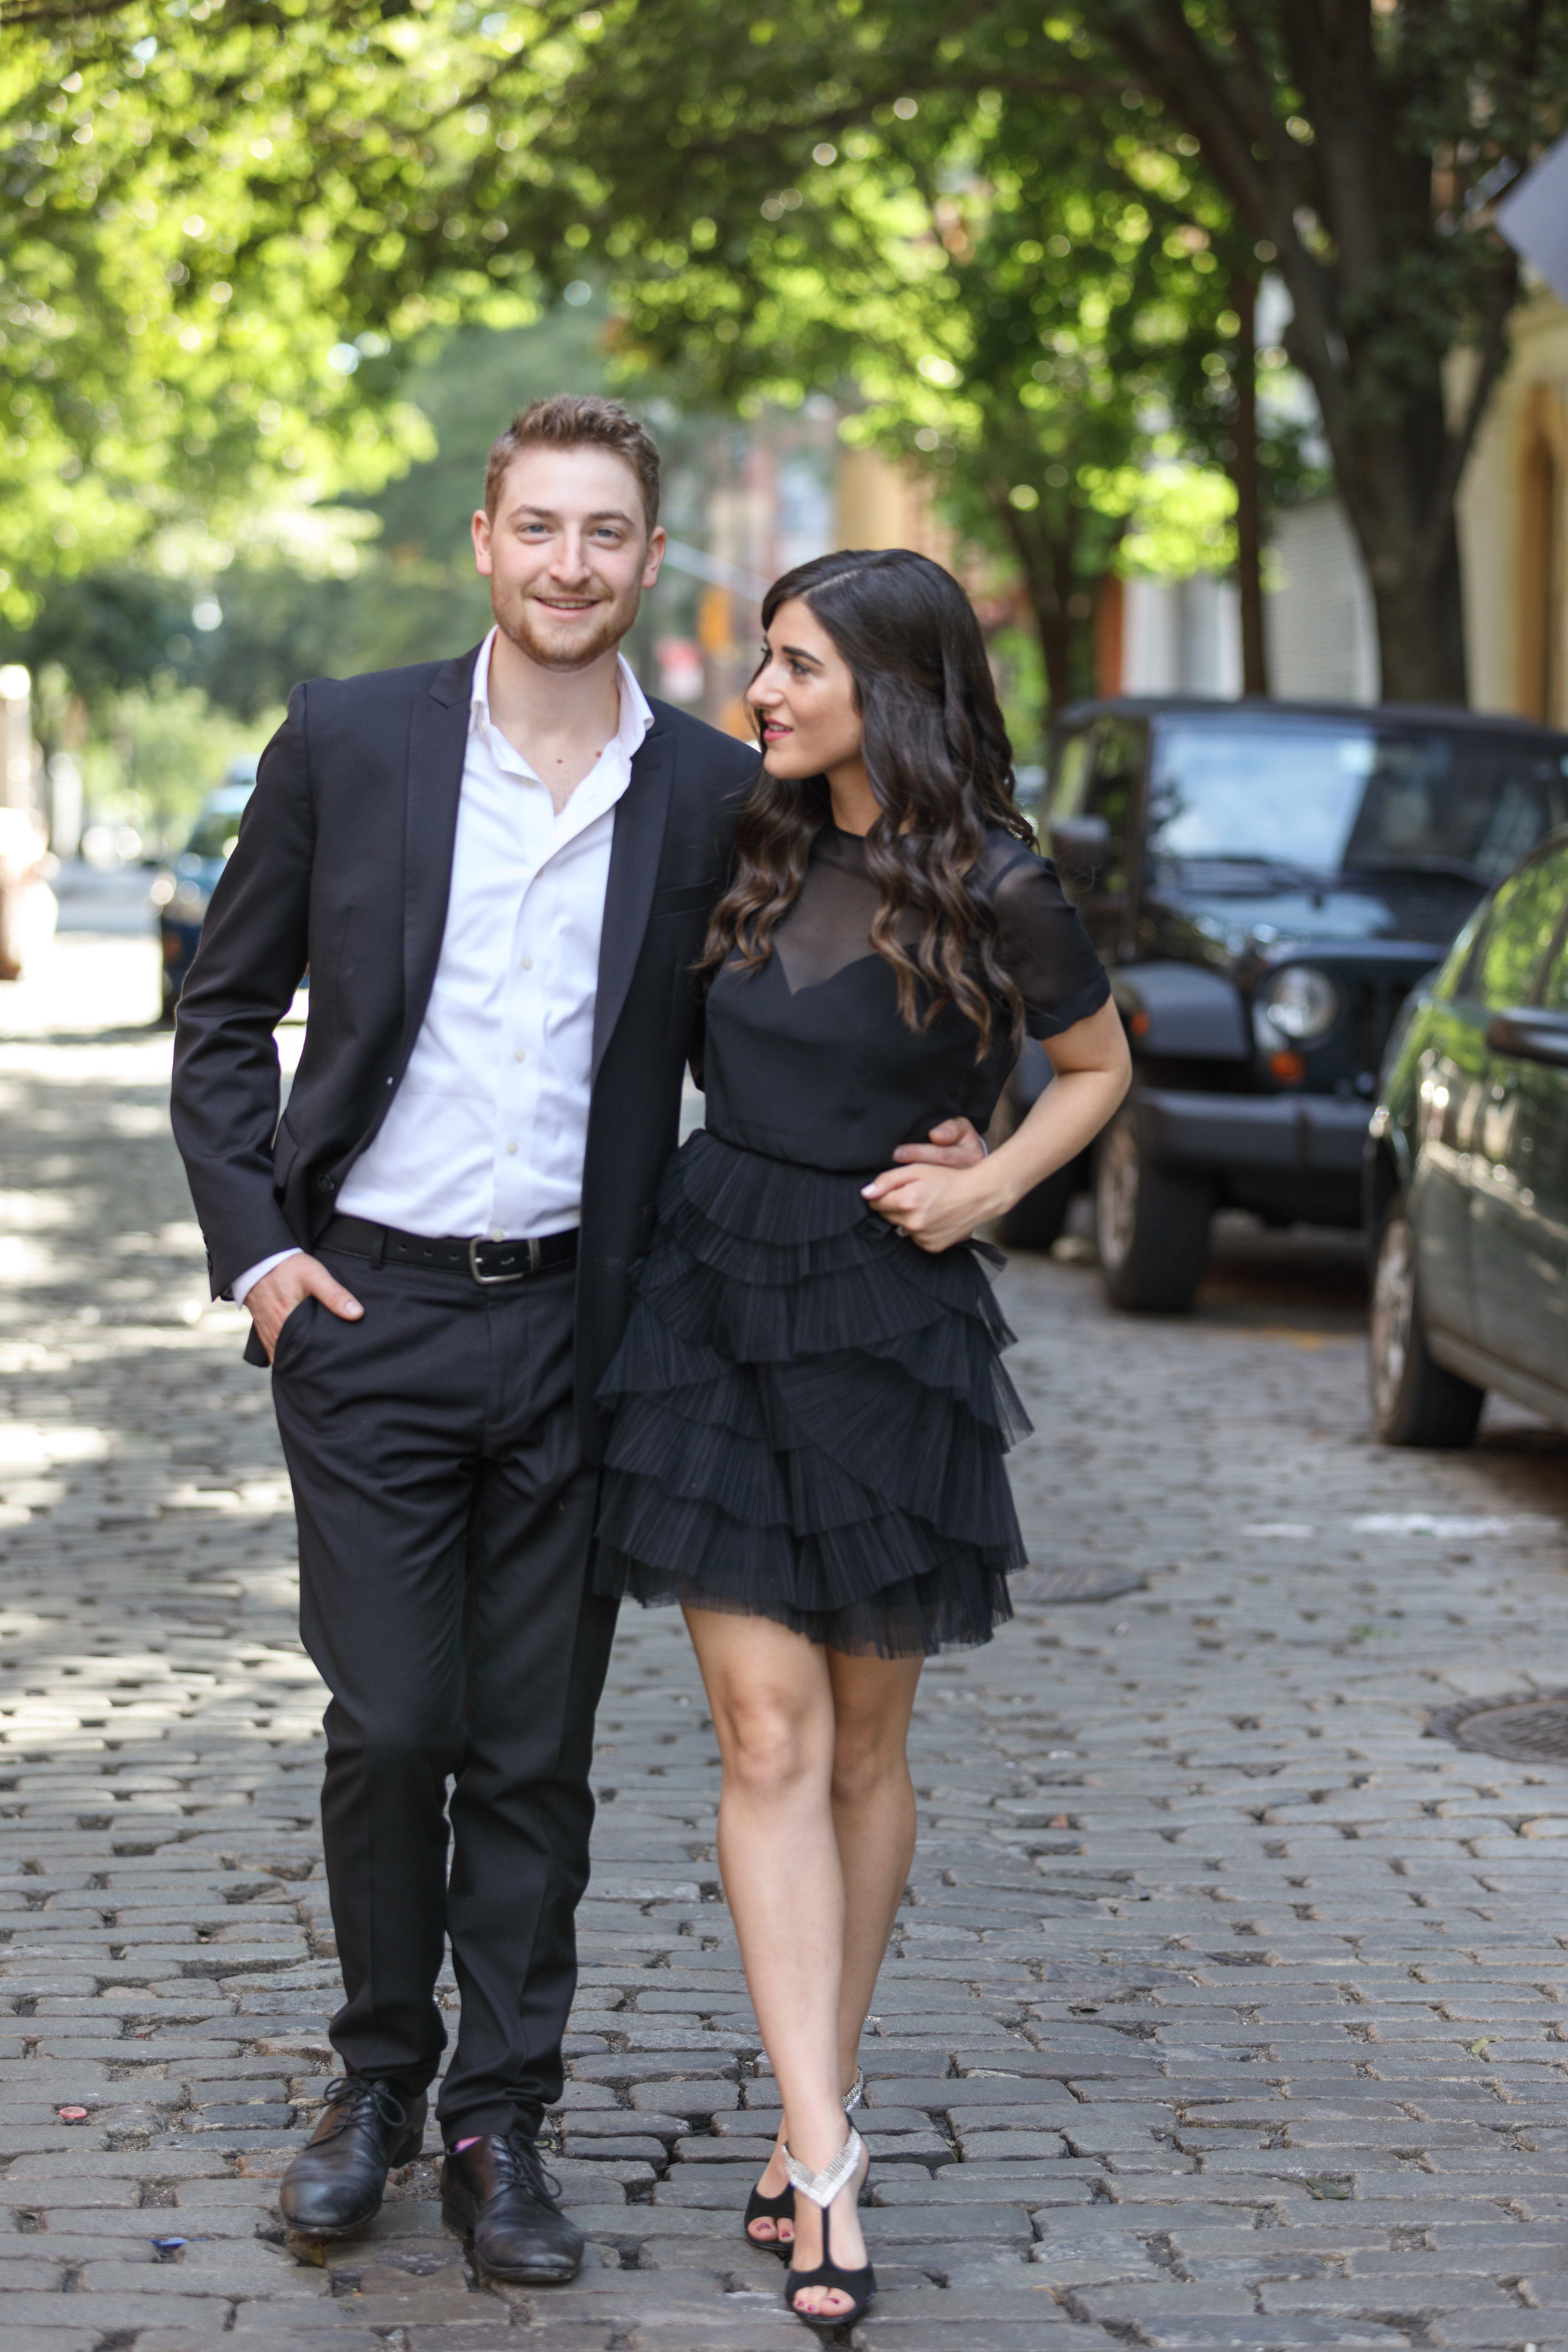 Why We Decided To Get Married On September 11 Esther Santer Fashion Blog NYC Street Style Blogger Outfits OOTD Trendy Engagement Shoot Photoshoot Lilian Haidar Photography Wedding Season Date Shoes  Dress Suit Fancy Formal Happy Smile Heels Hair Girl.JPG